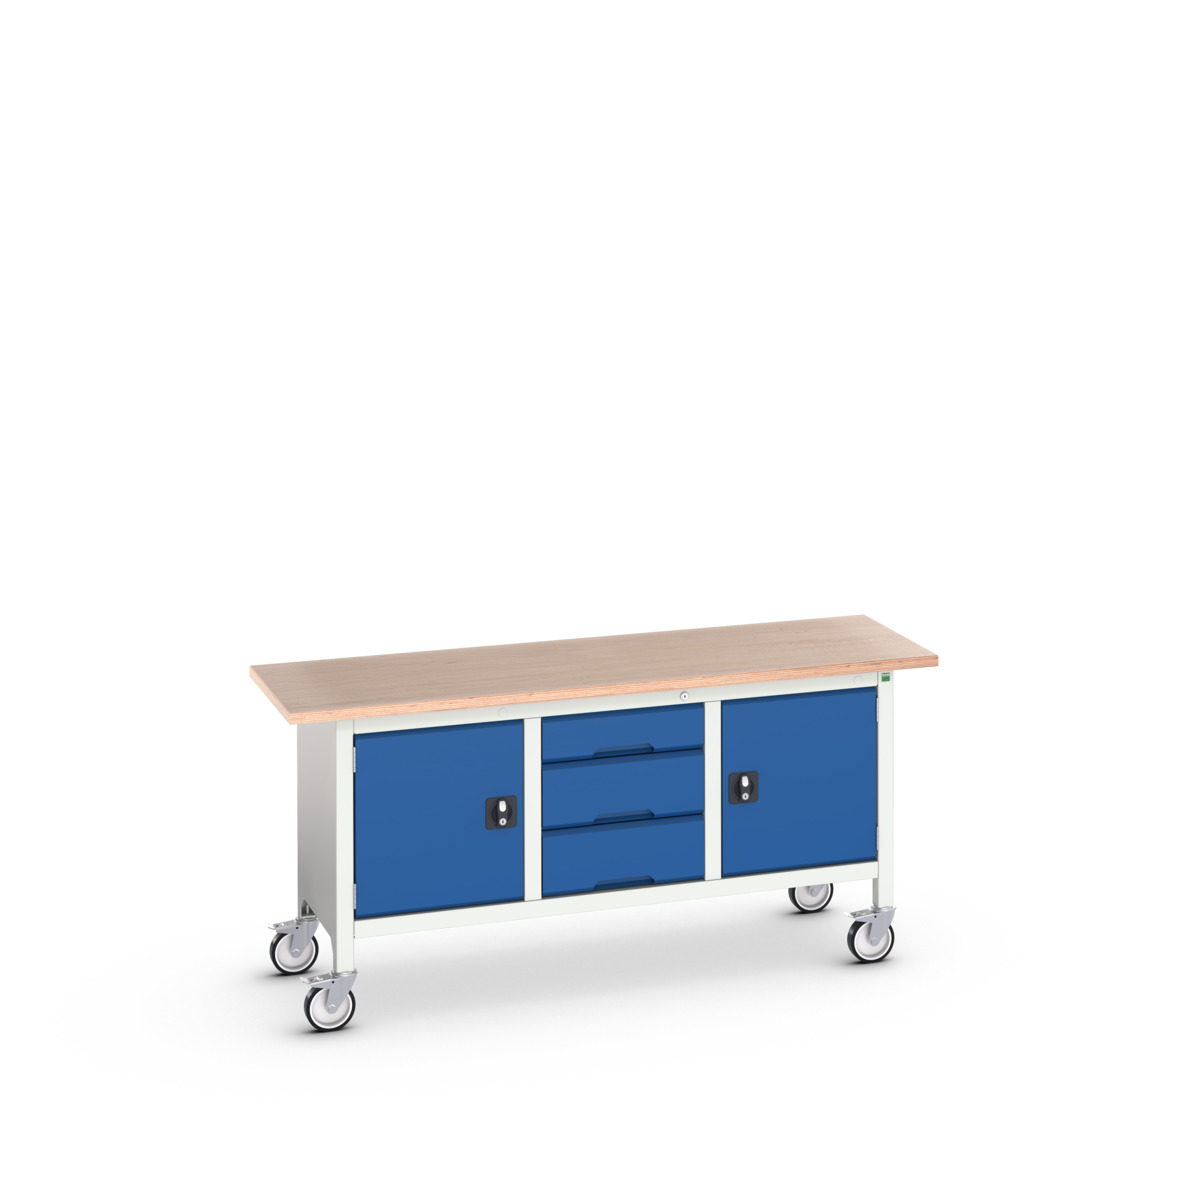 16923222.11 - verso mobile storage bench (mpx)